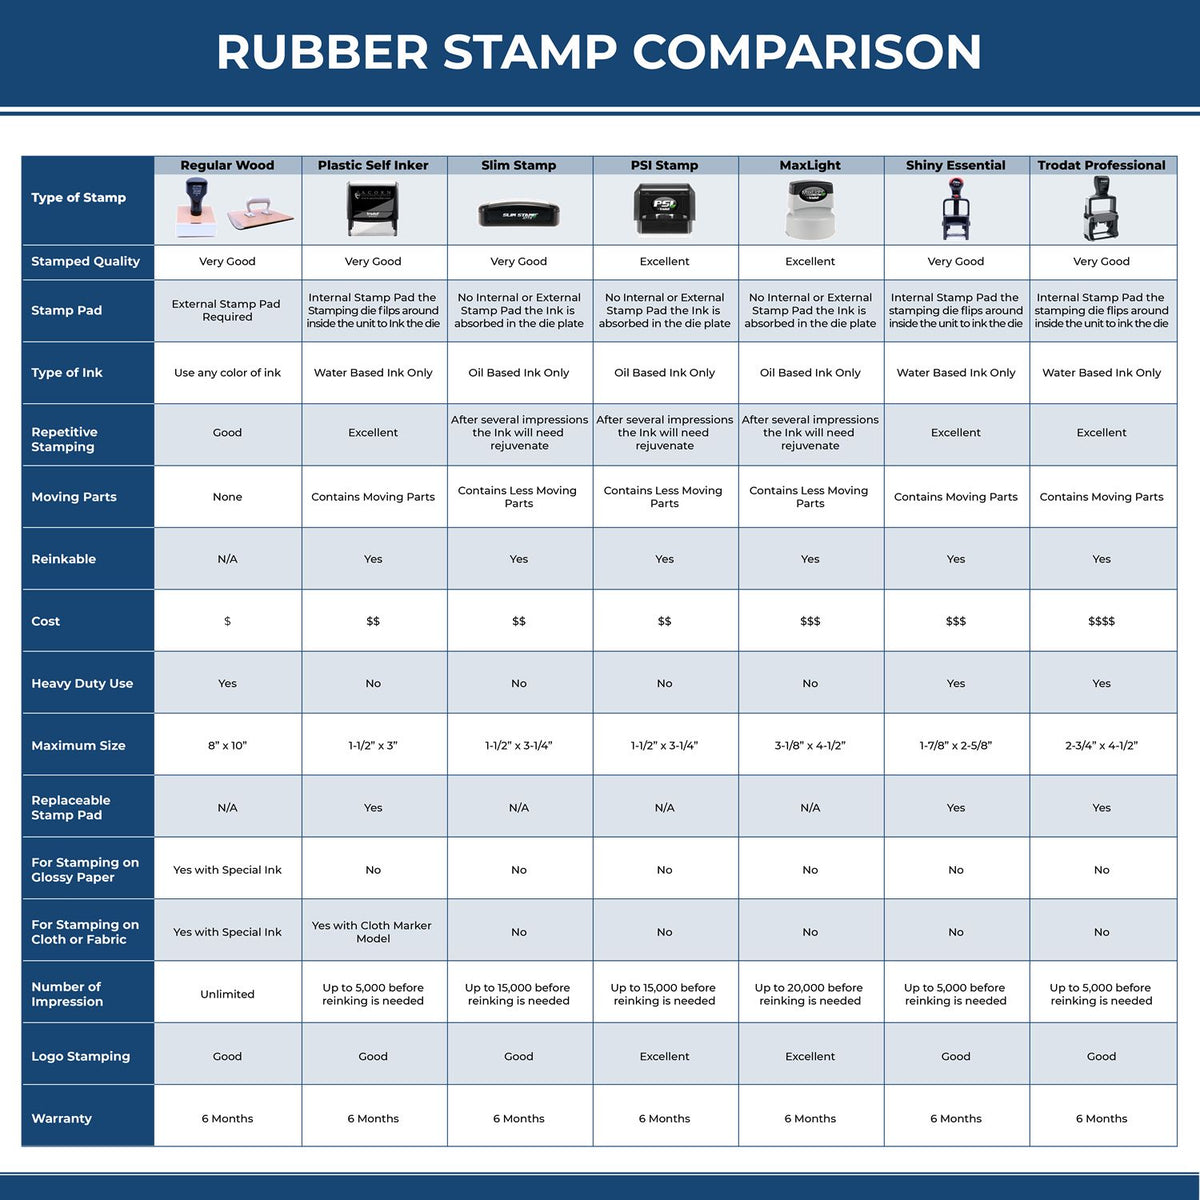 A comparison chart for the different types of mount models available for the Self-Inking Hawaii PE Stamp.